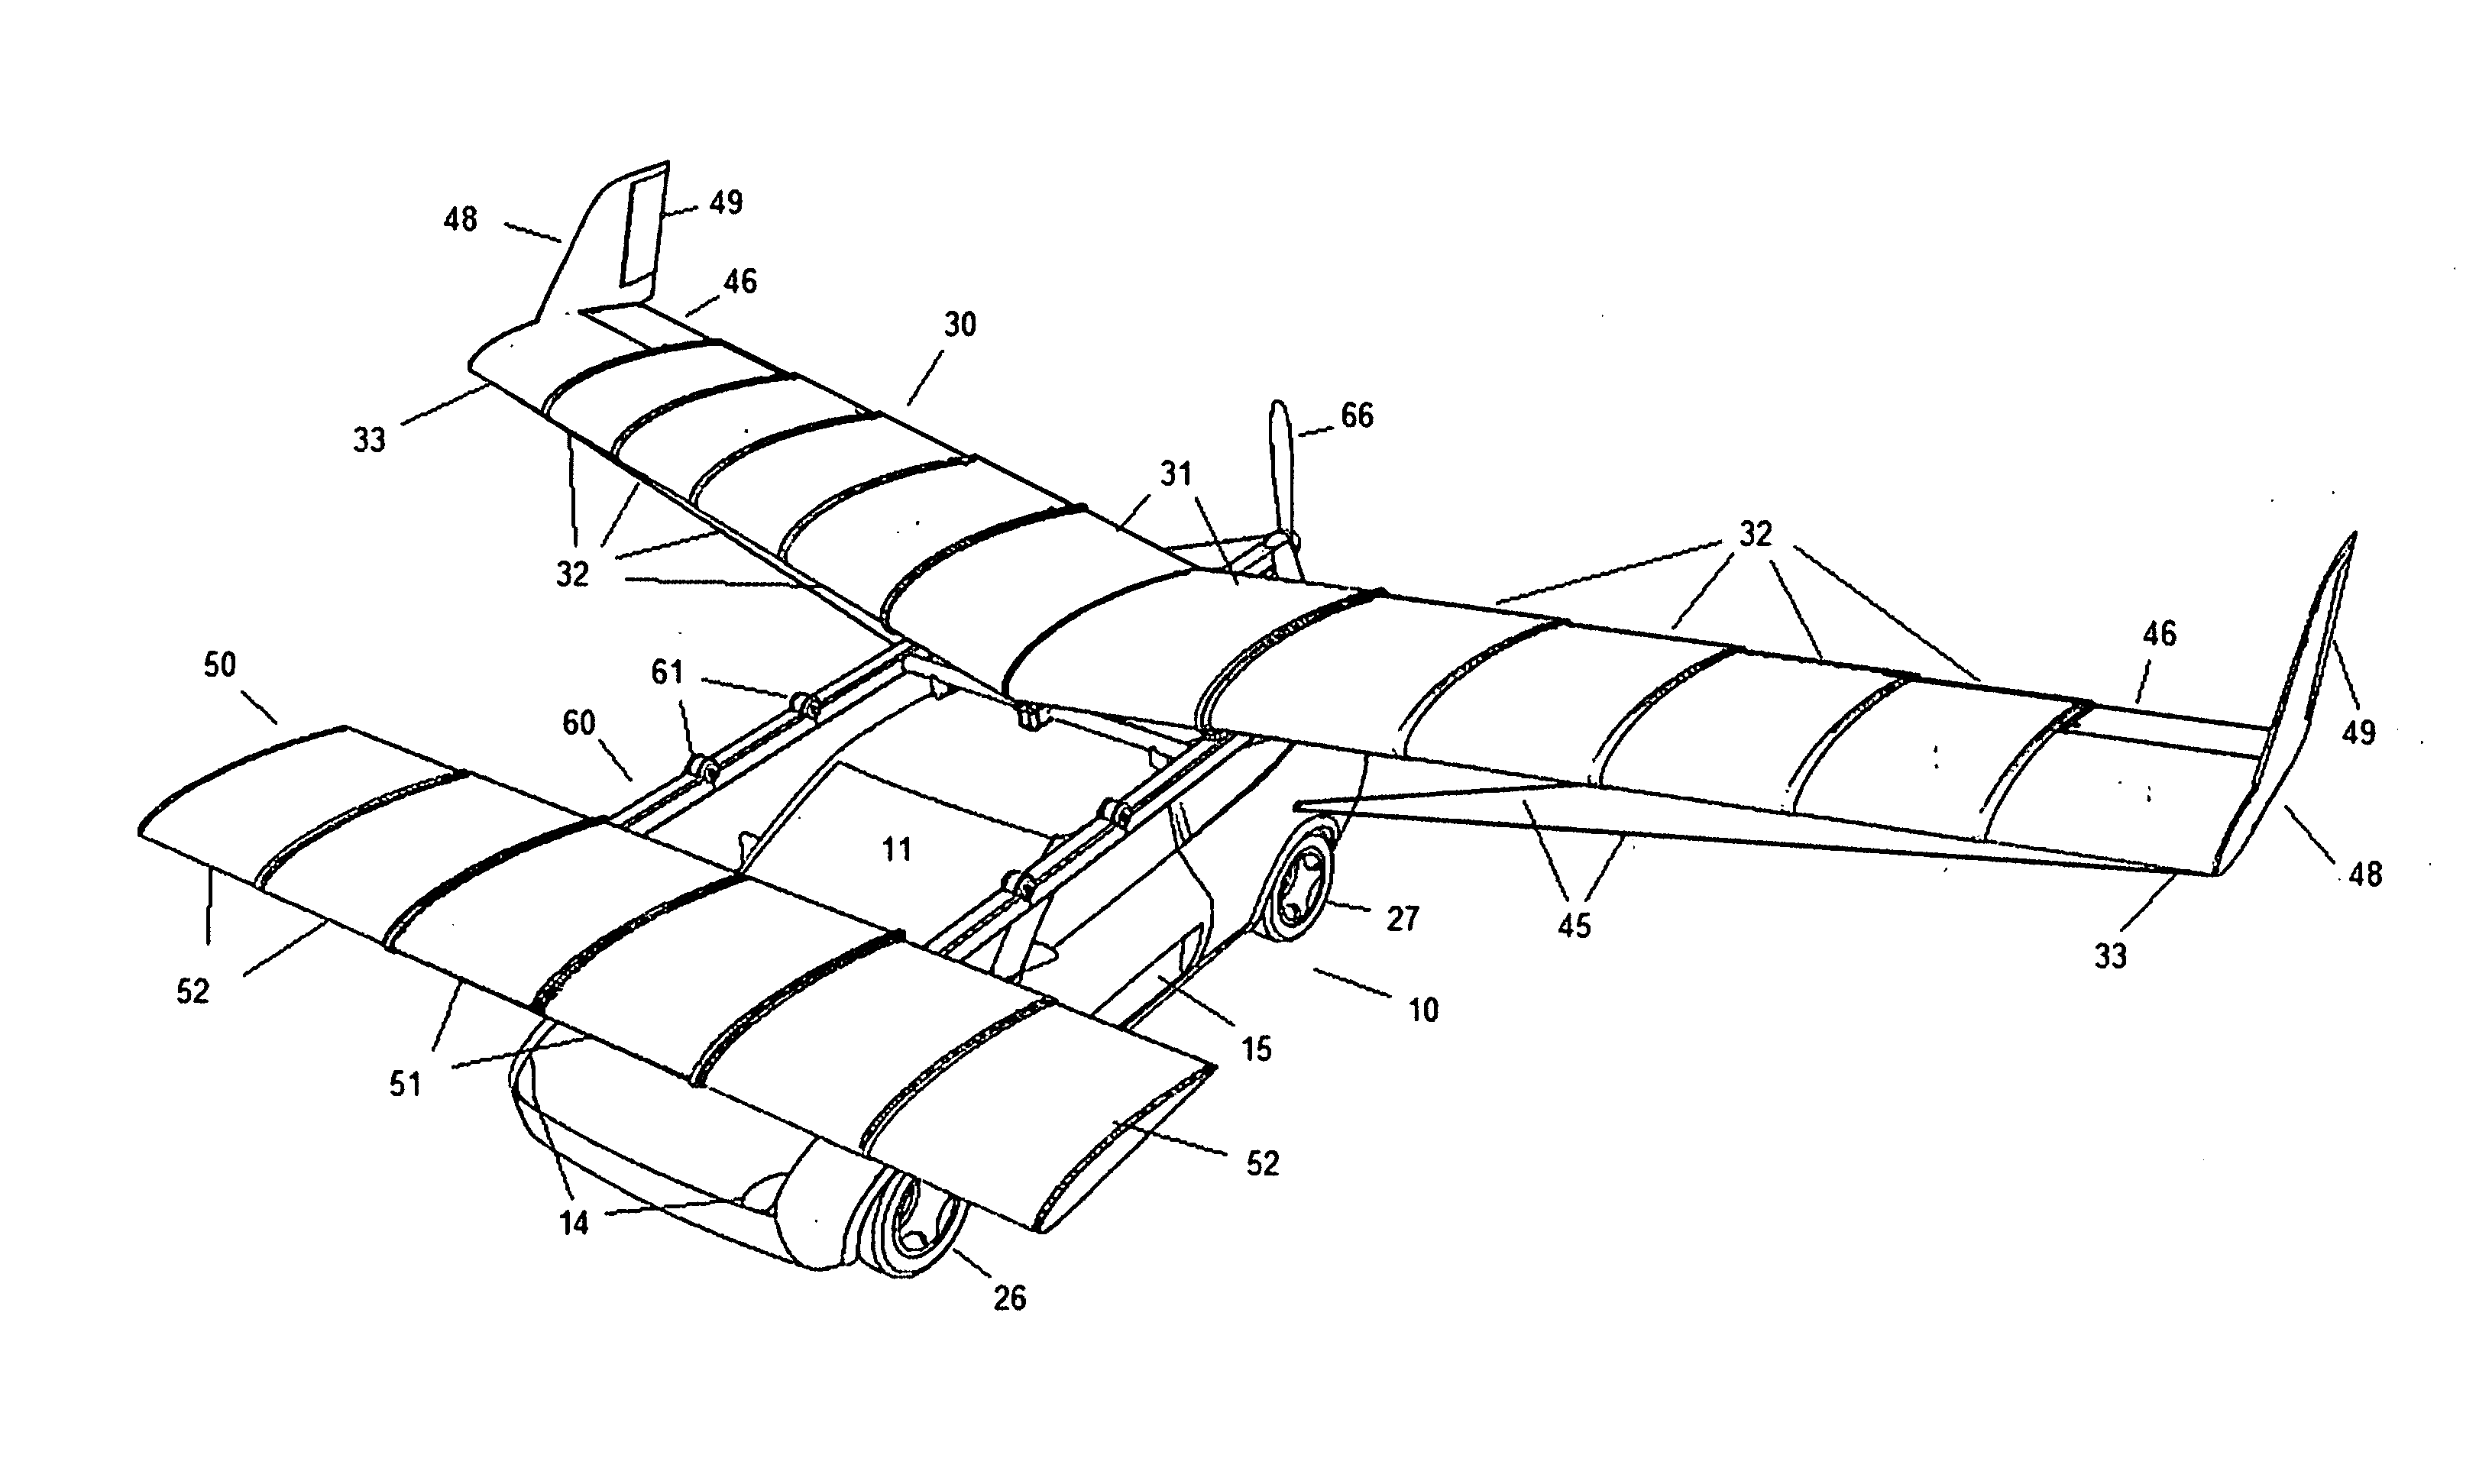 Telescopic Wing and Rack System for Automotive Airplane